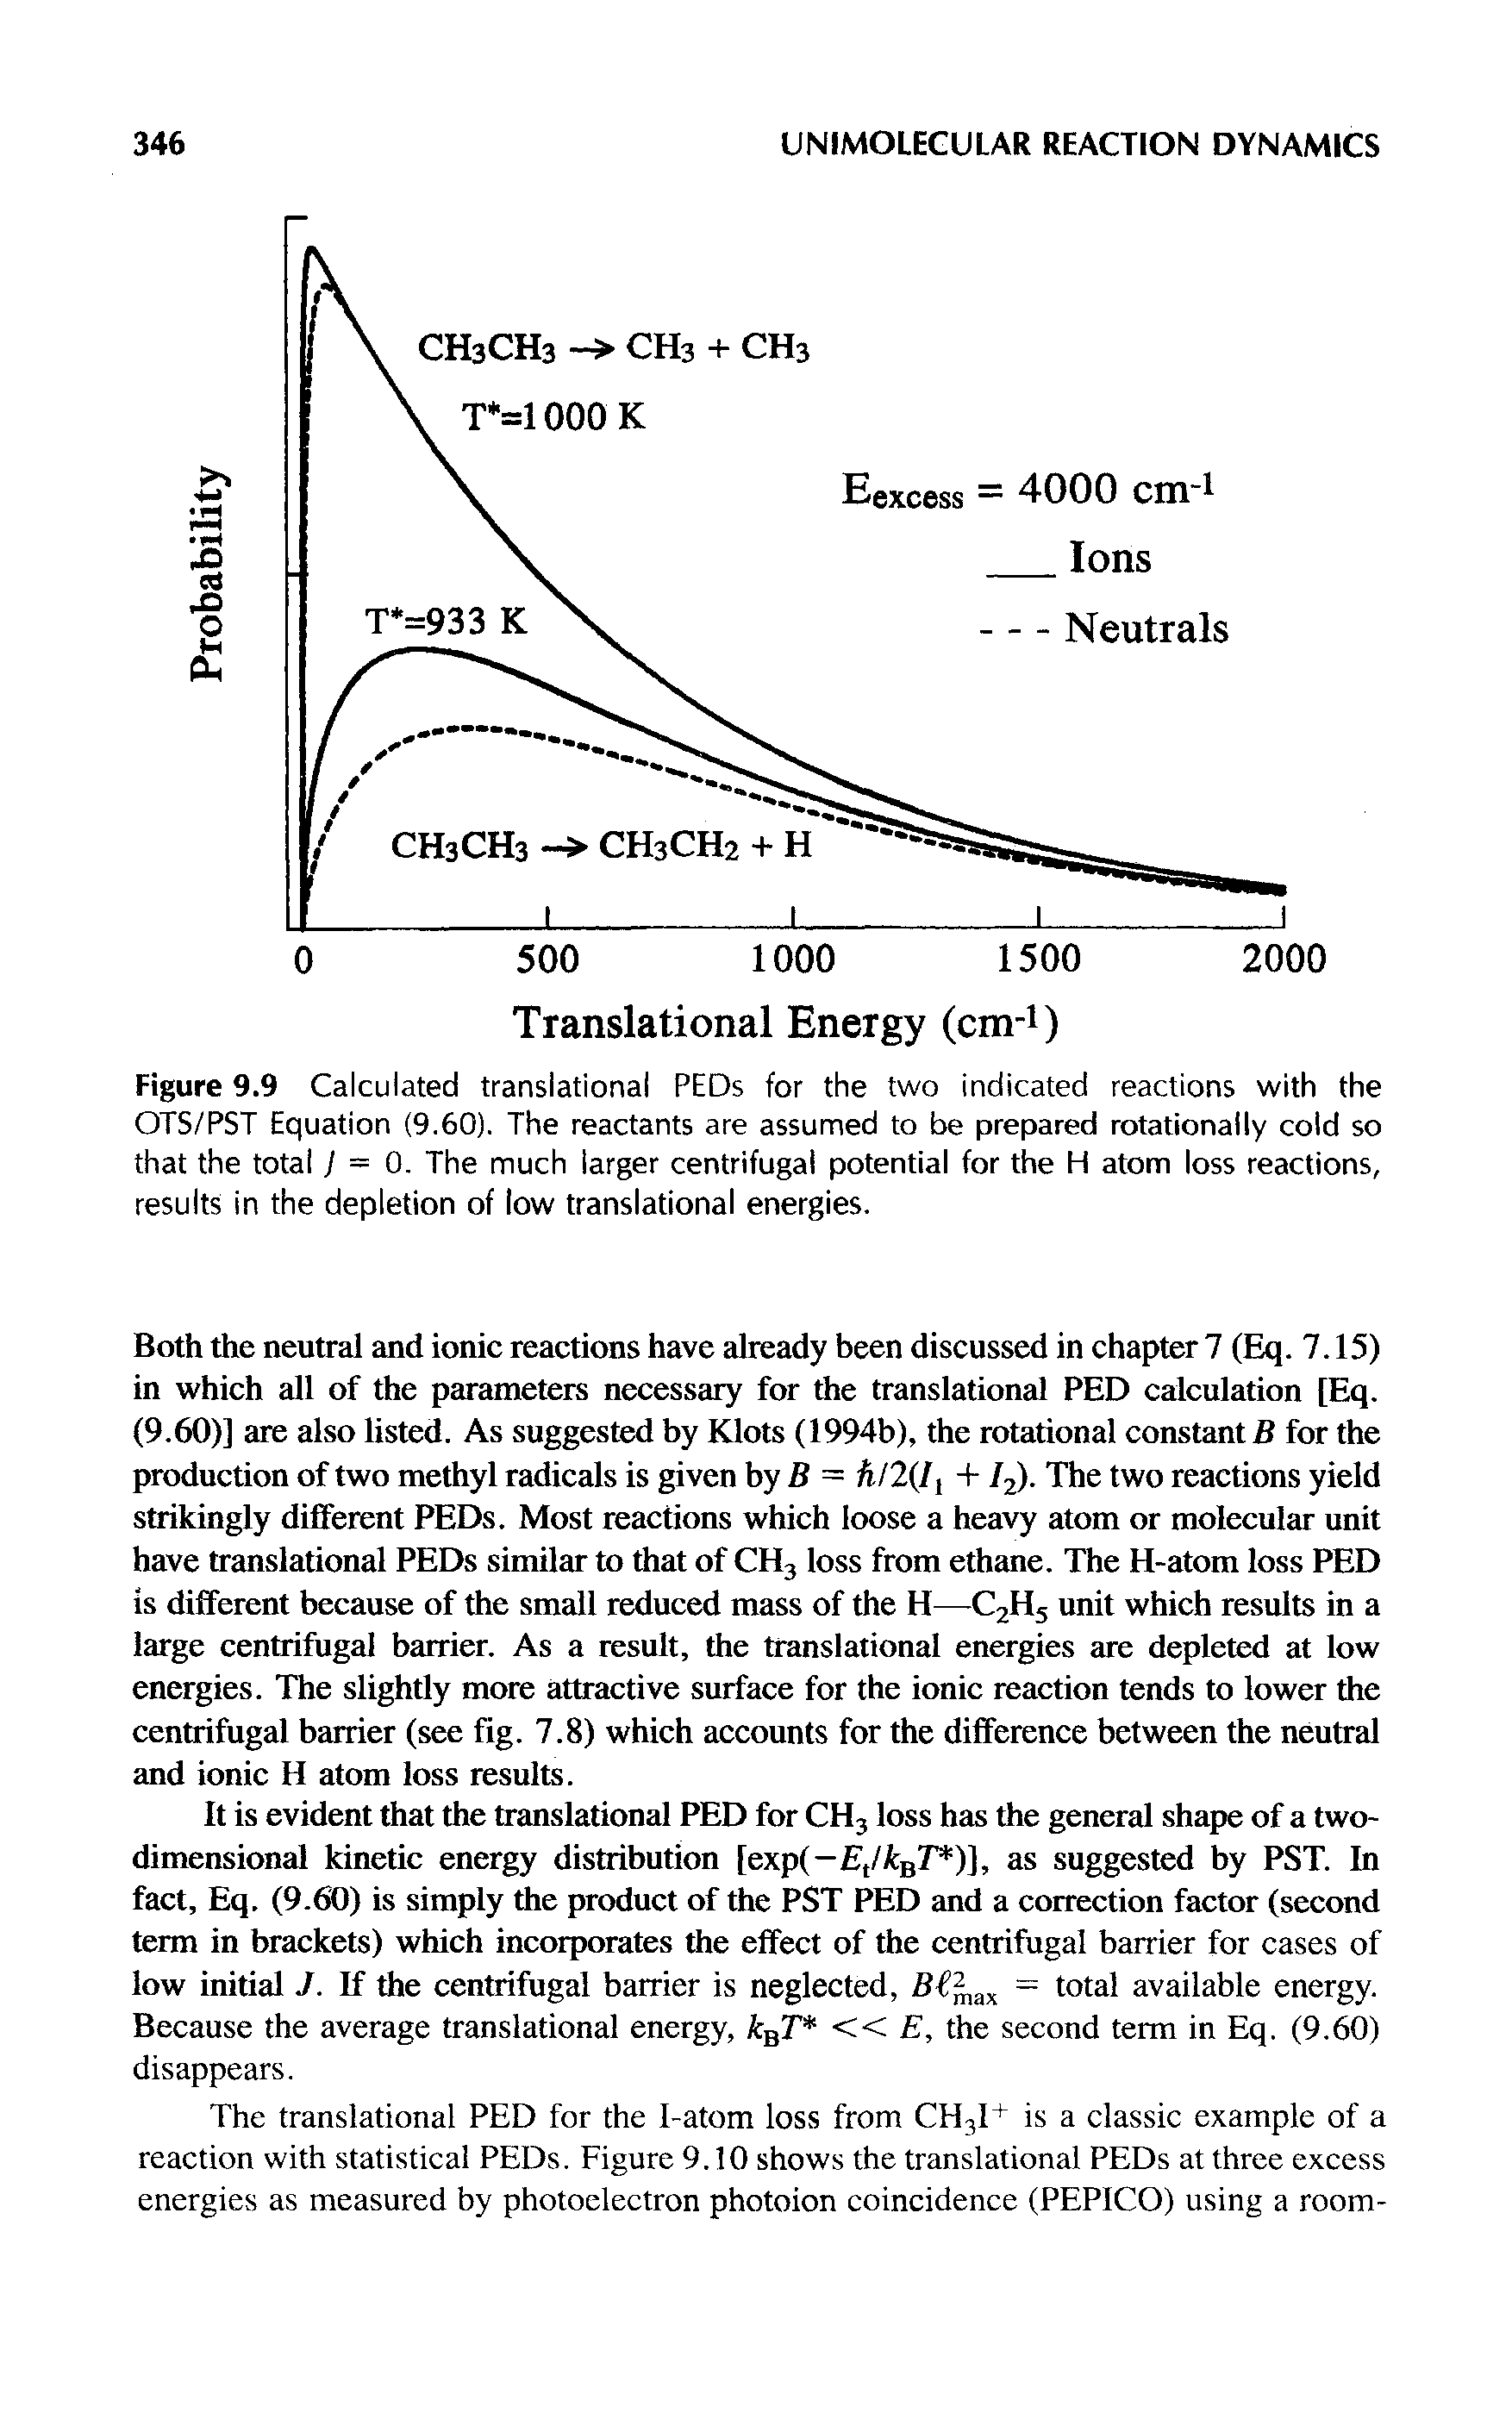 Figure 9.9 Calculated translational PEDs for the two indicated reactions with the OTS/PST Equation (9.60). The reactants are assumed to be prepared rotationally cold so that the total 1 = 0. The much larger centrifugal potential for the H atom loss reactions, results in the depletion of low translational energies.